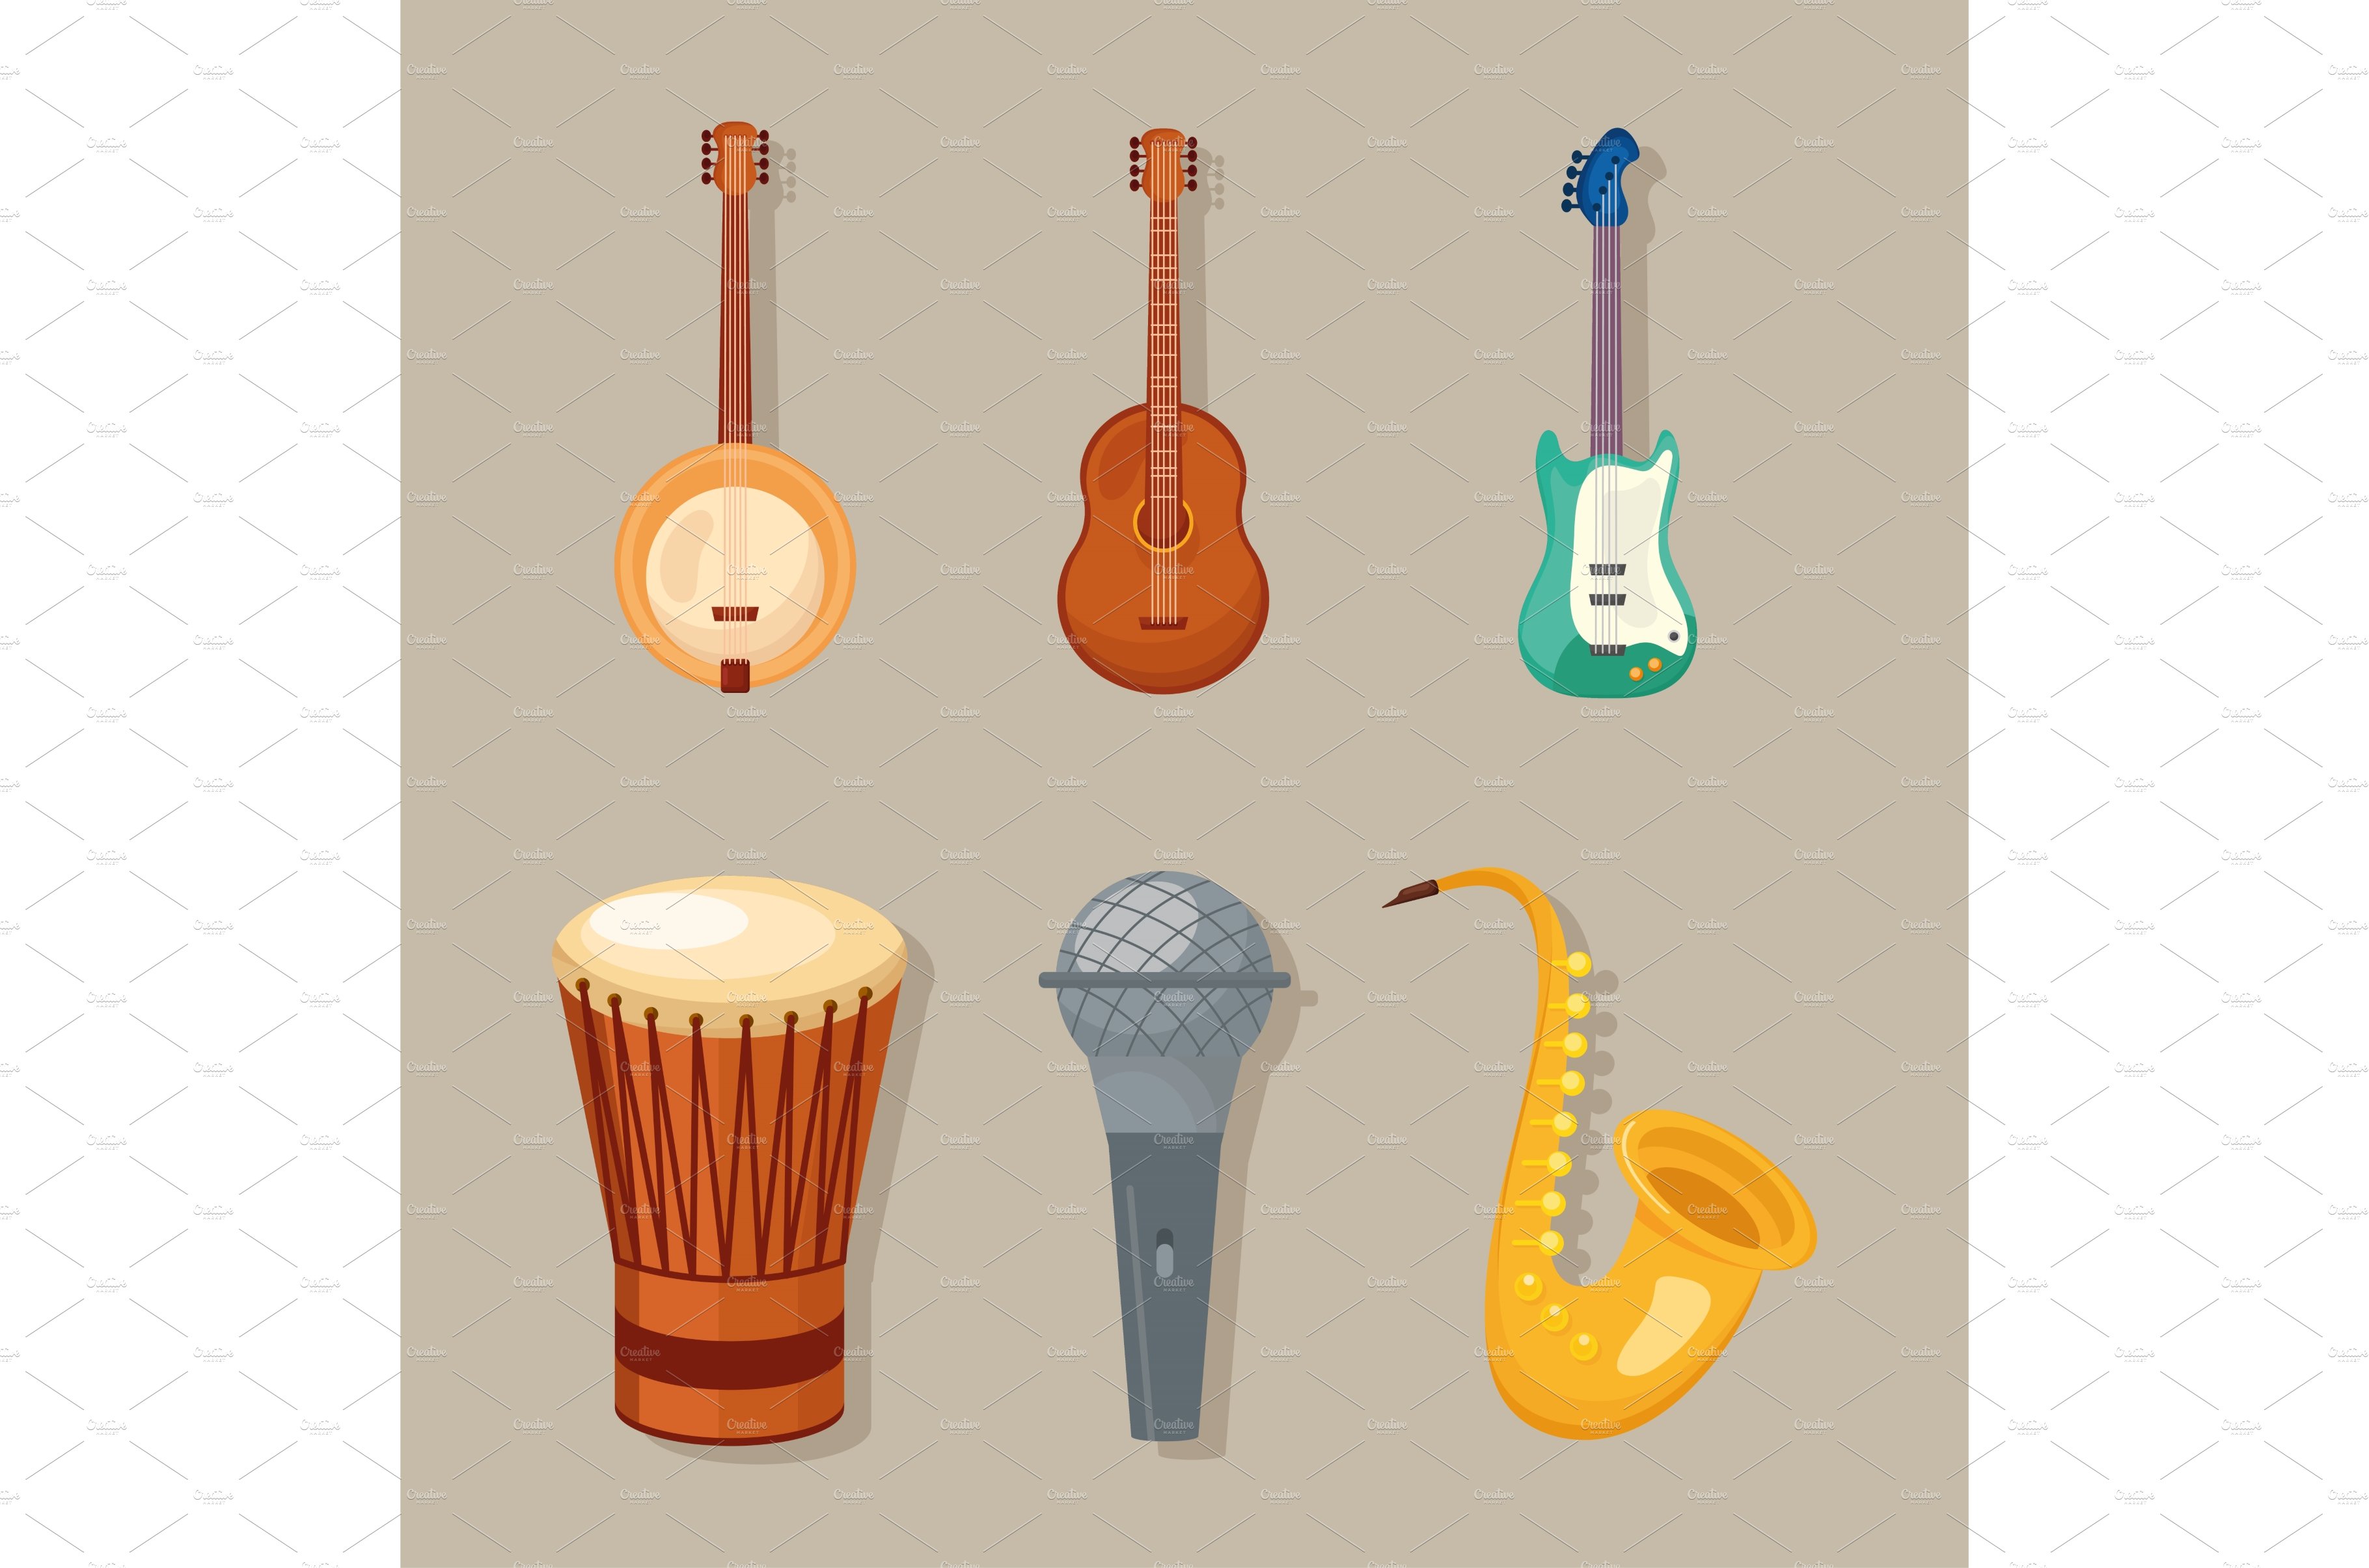 six musical instruments icons cover image.